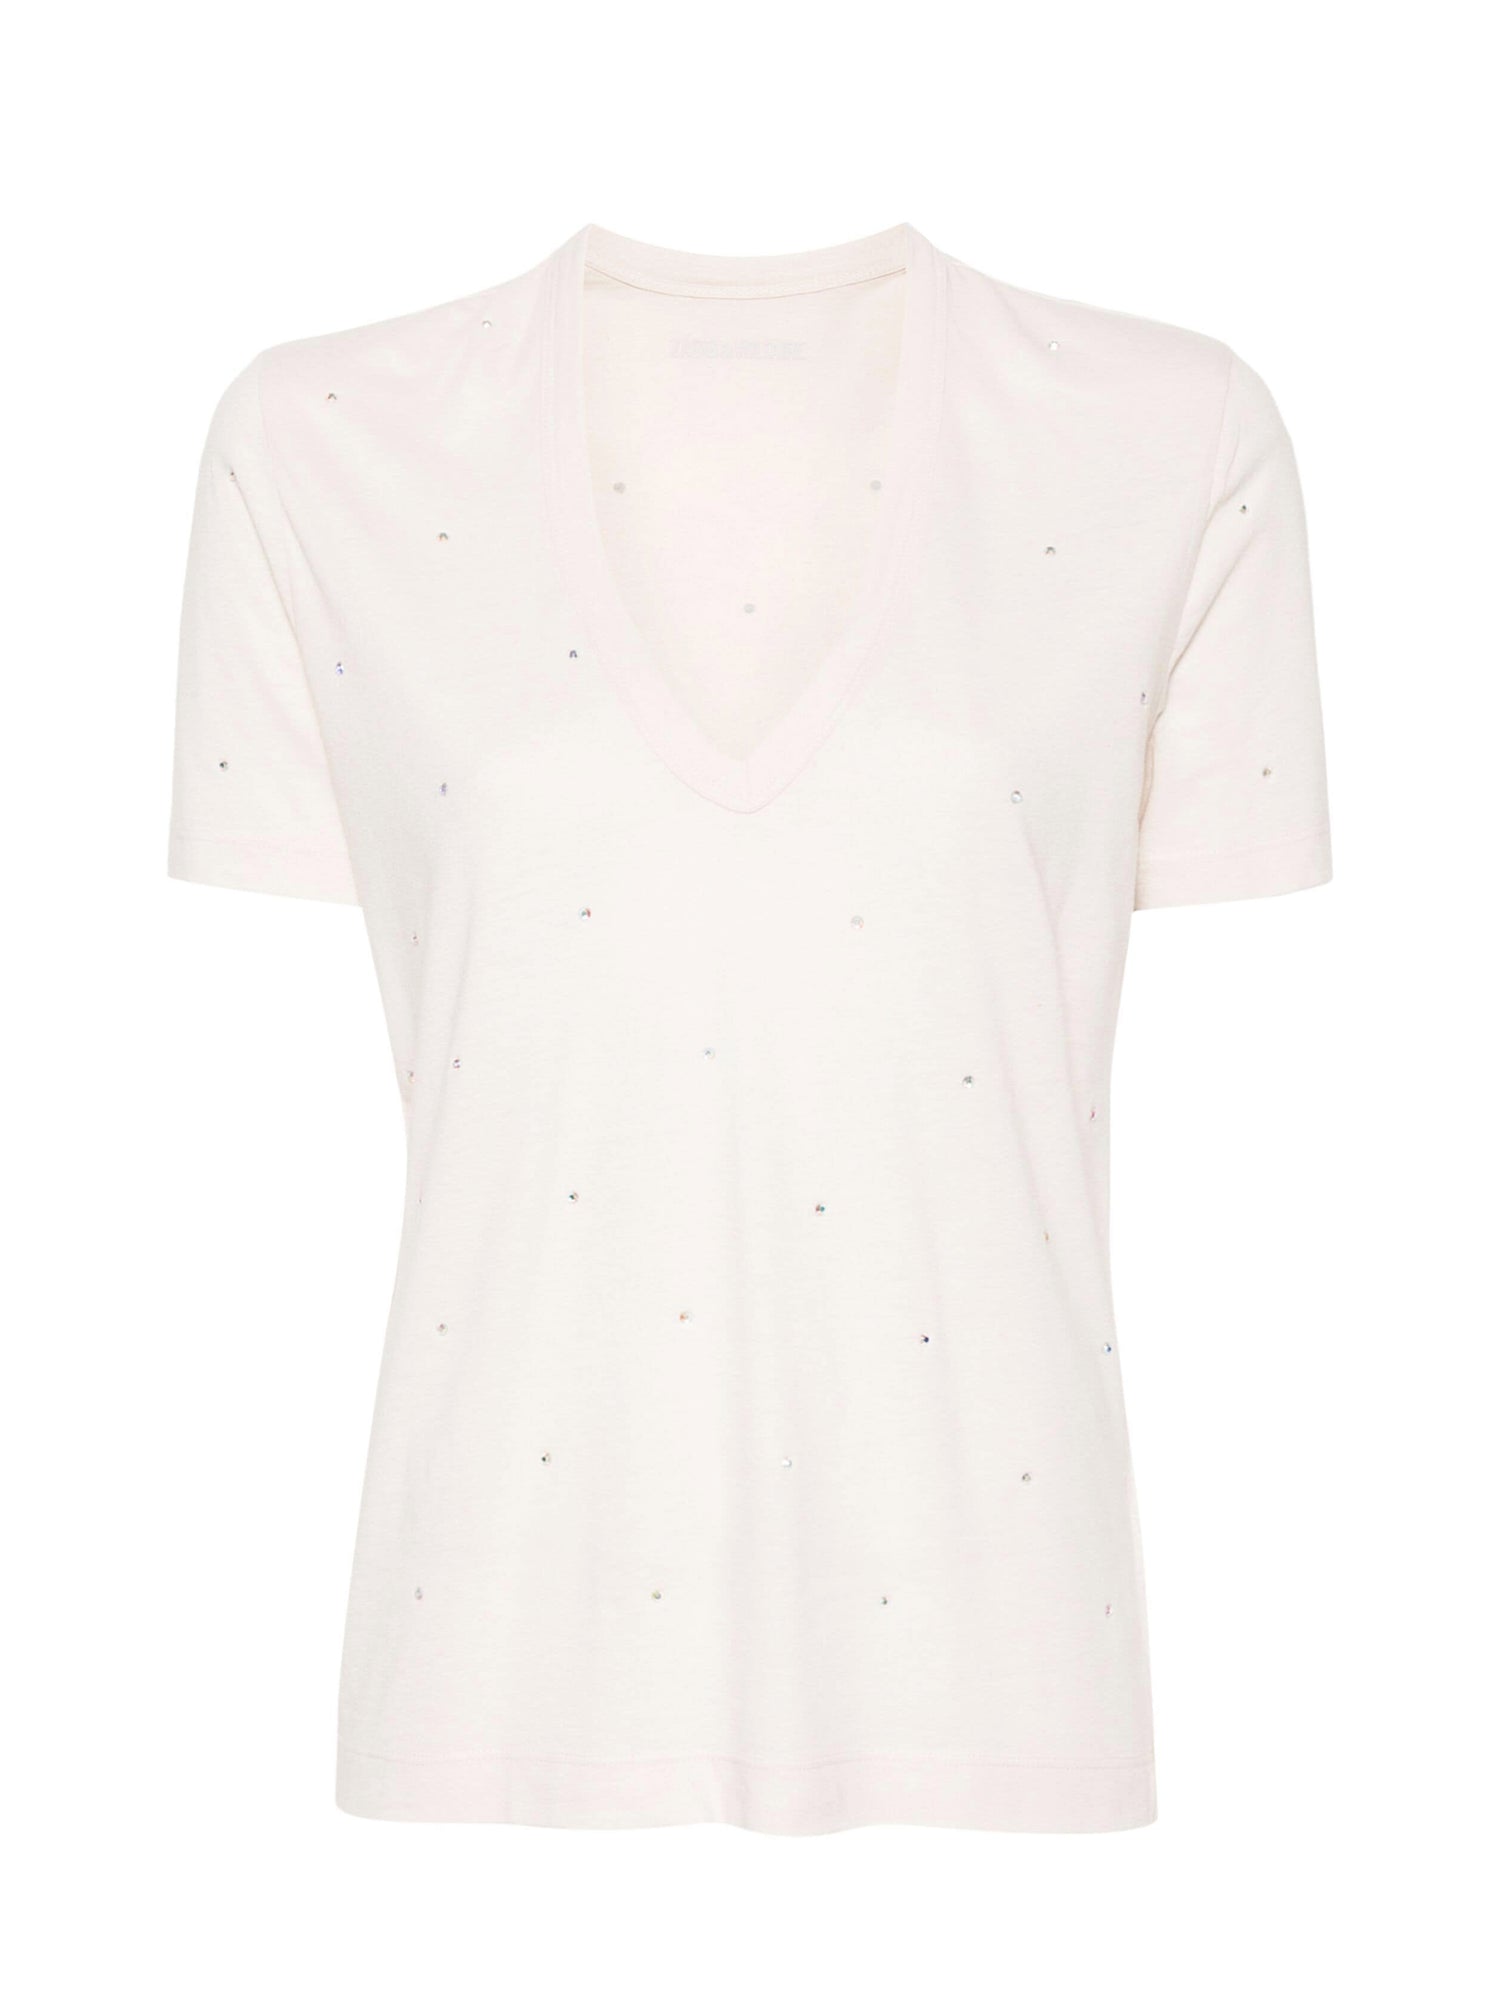 Crystal-embellished T-shirt by Zadig & Voltaire